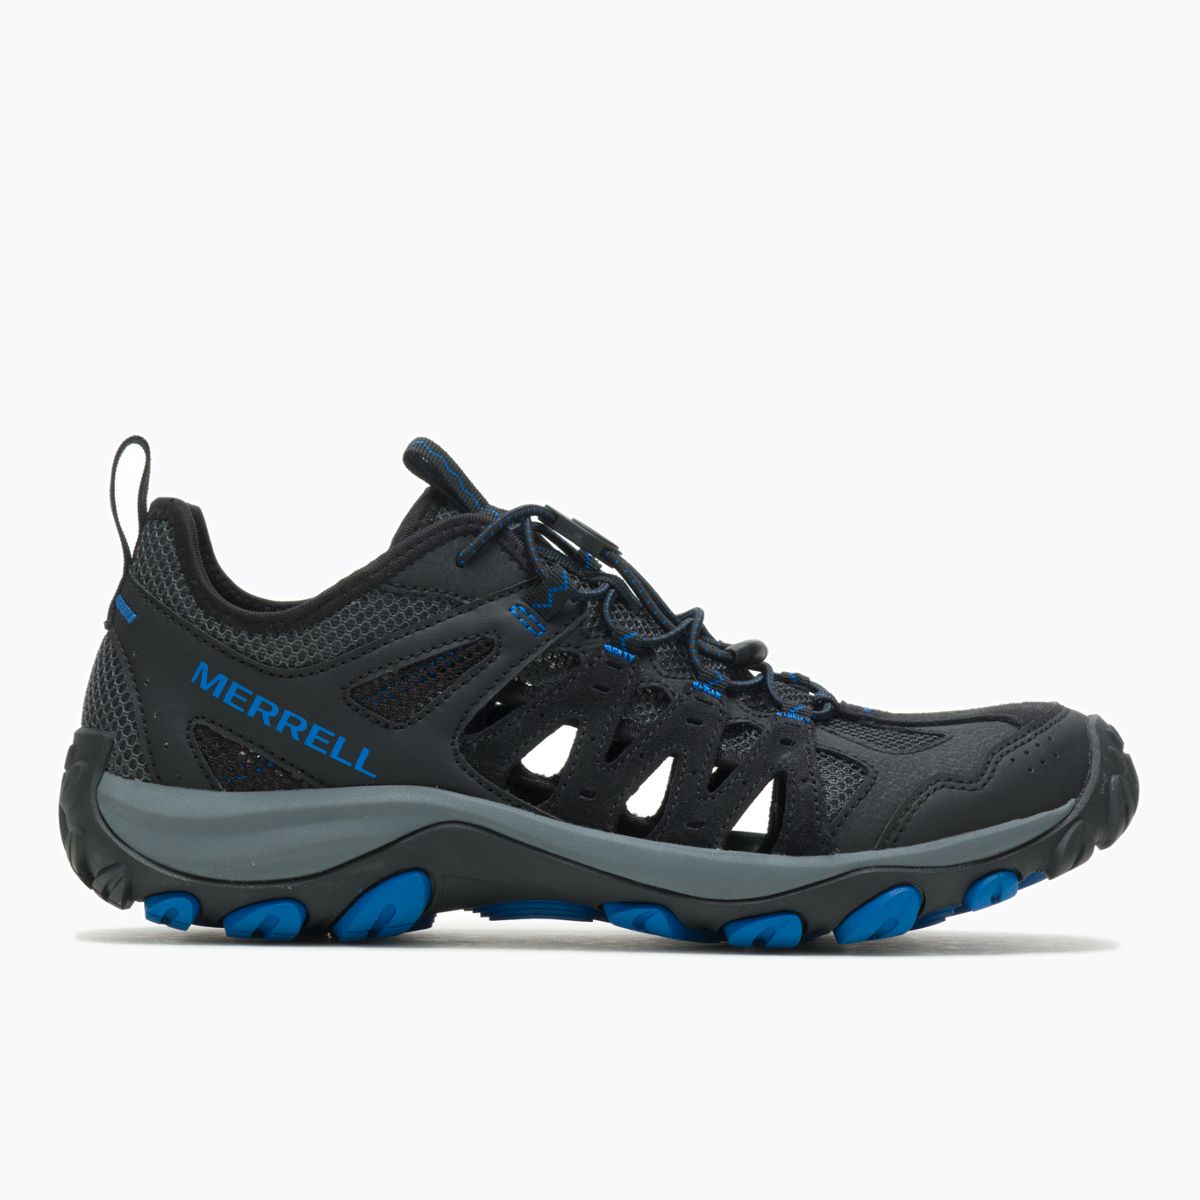 Accentor 3 Sieve - Shoes | Merrell